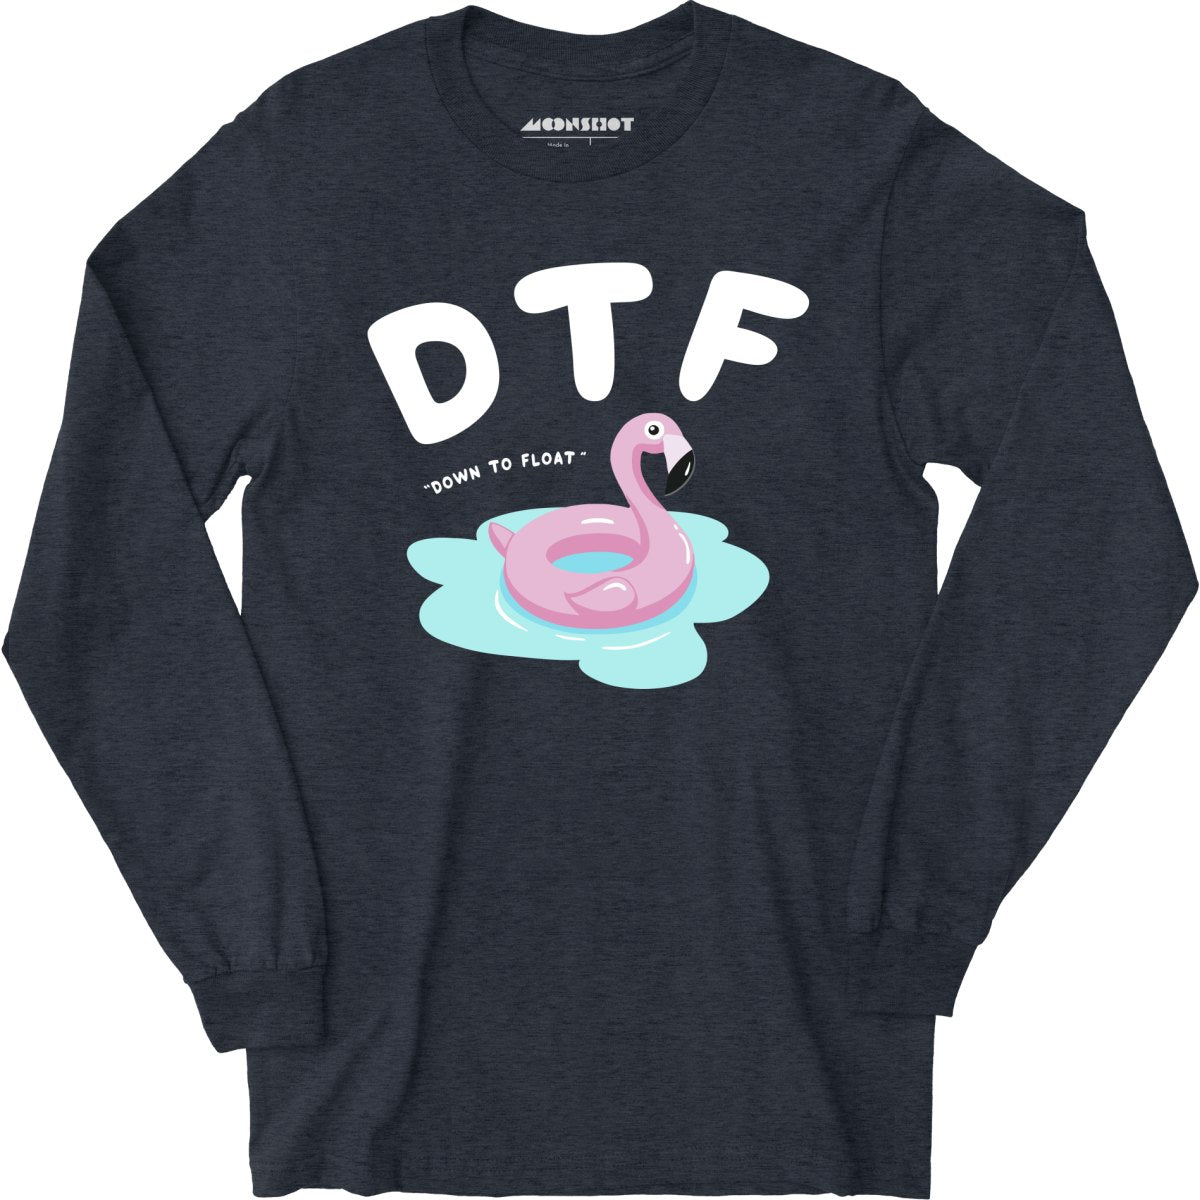 Down to Float - Long Sleeve T-Shirt